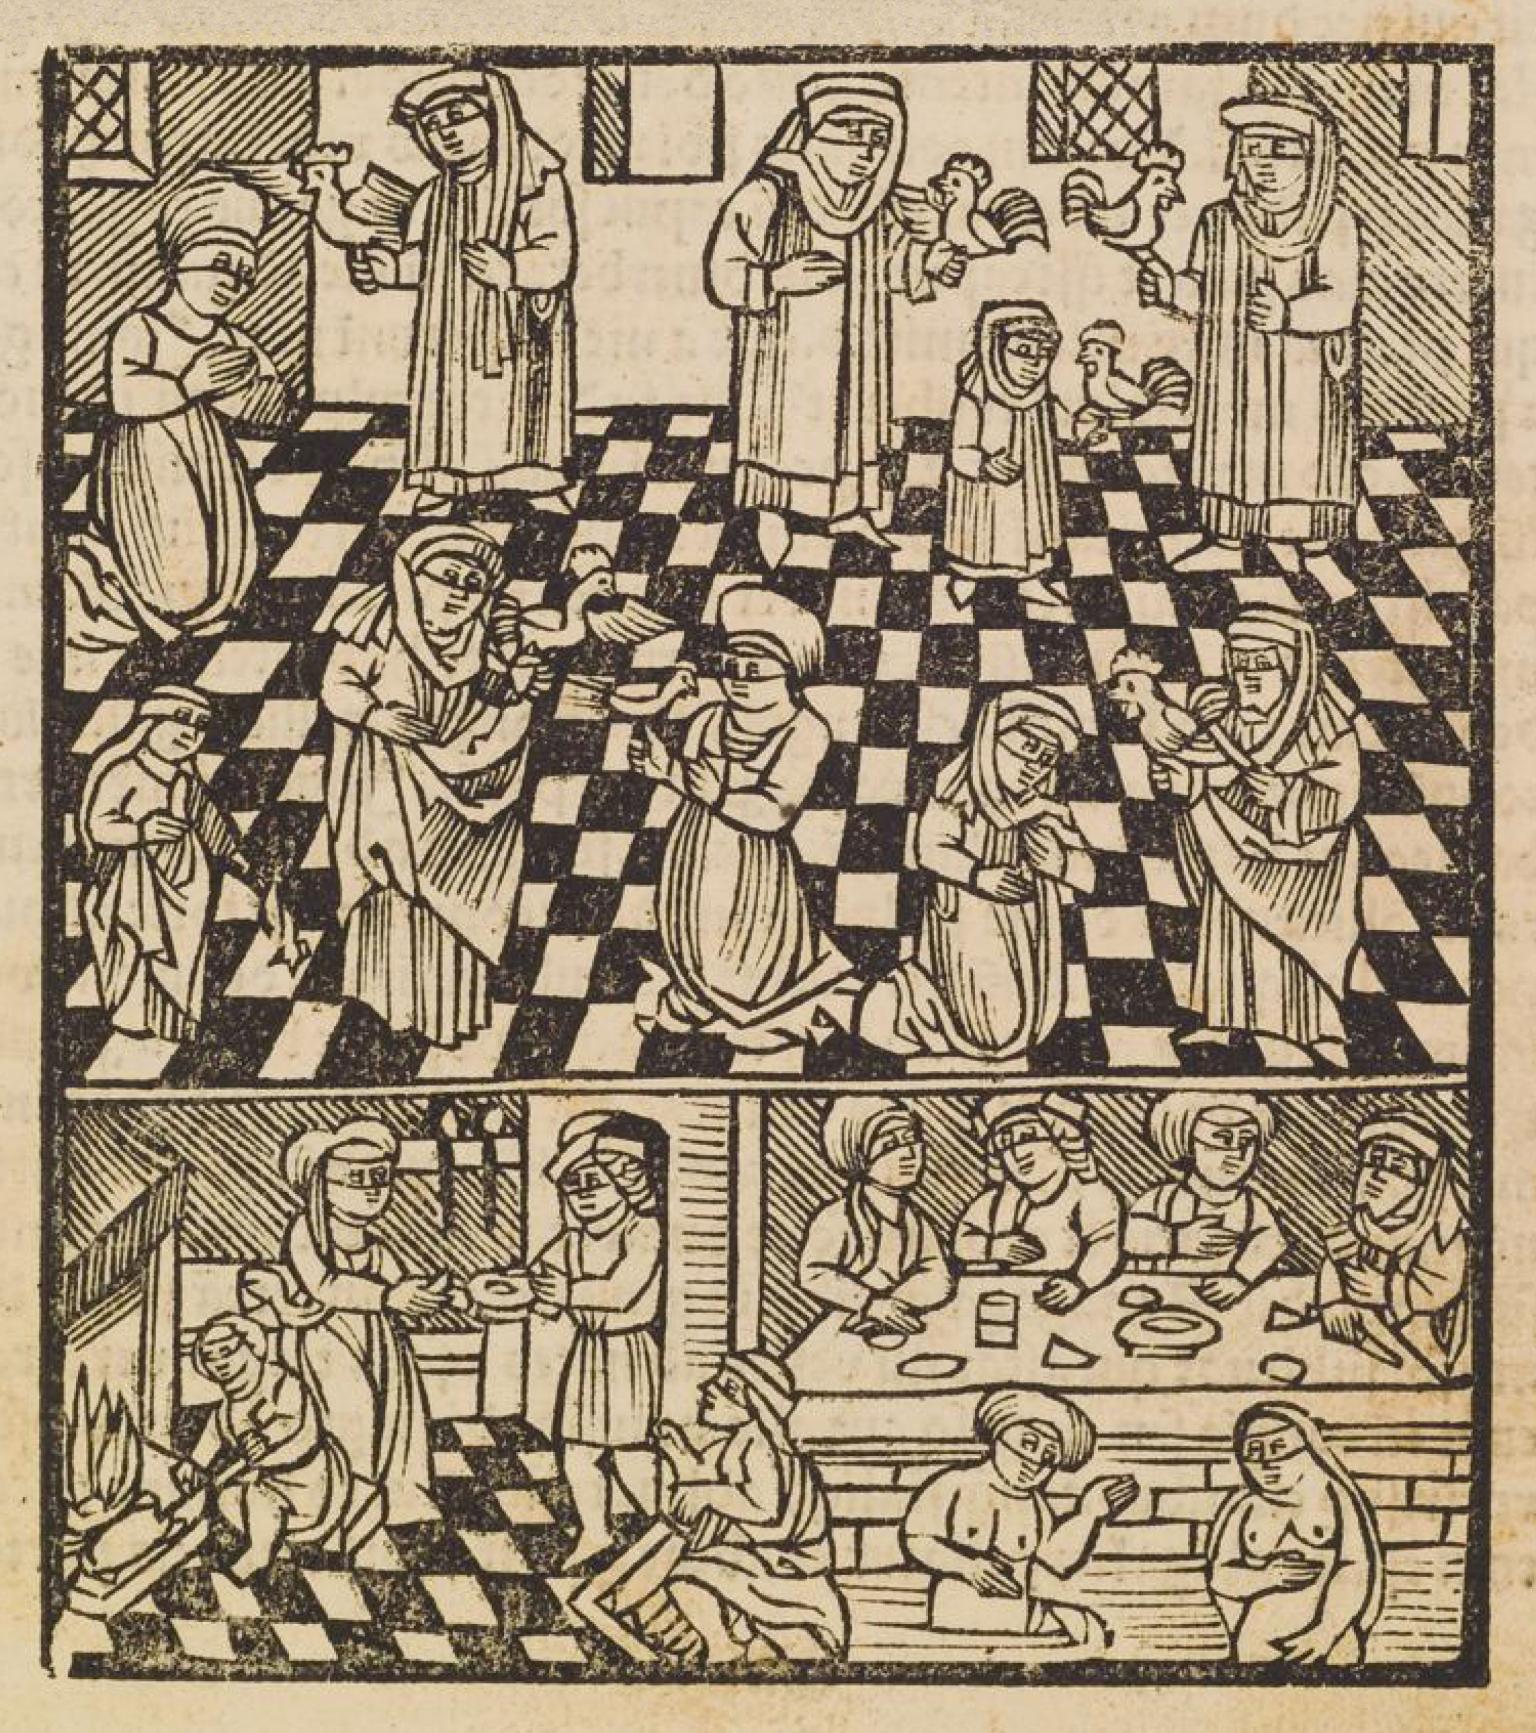 Print image of people indoors holding roosters in top panel and people eating and bathing in bottom panel.